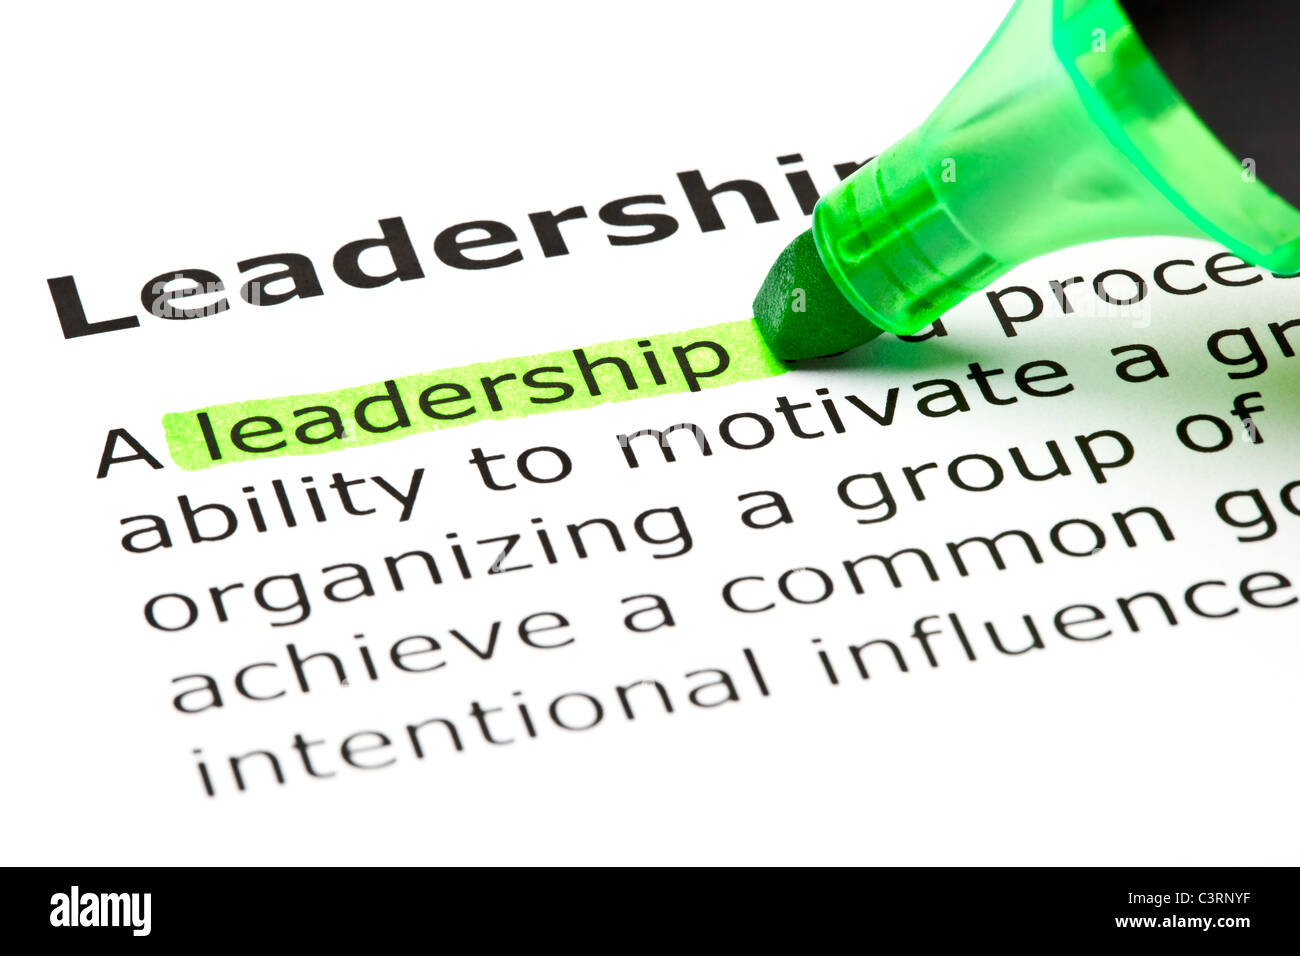 The word 'Leadership' highlighted in green with felt tip pen Stock Photo